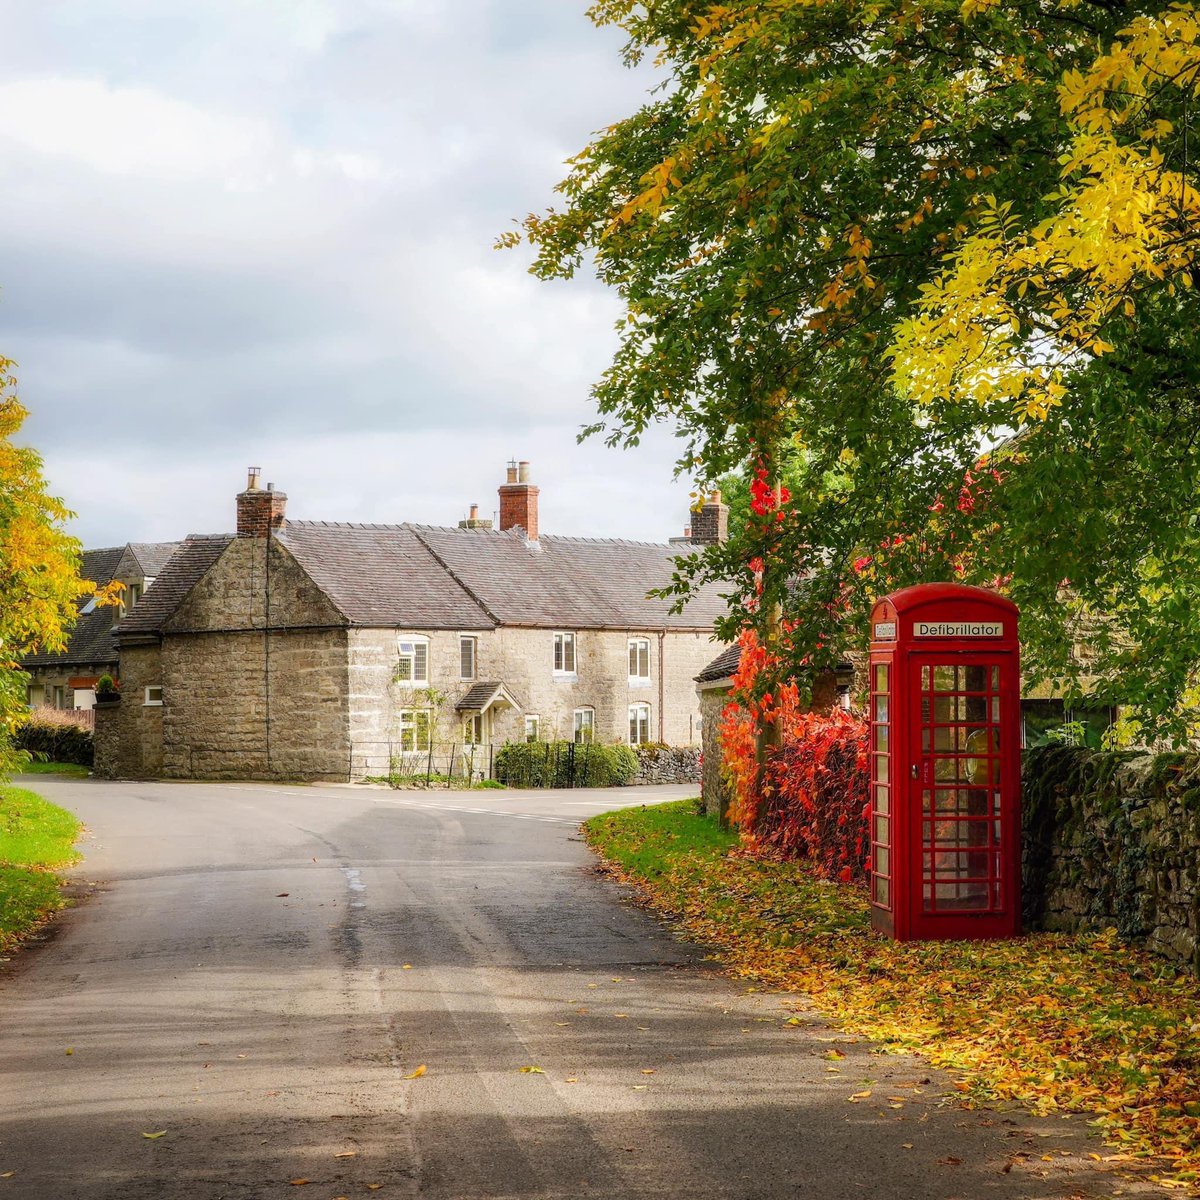 This is the pretty Derbyshire village of Bradbourne, looking perfect in its early autumn finery. It has the distinction of being one of only fifteen 'Doubly Thankful' villages in England, meaning that all the men from the village returned safely home after both world wars.